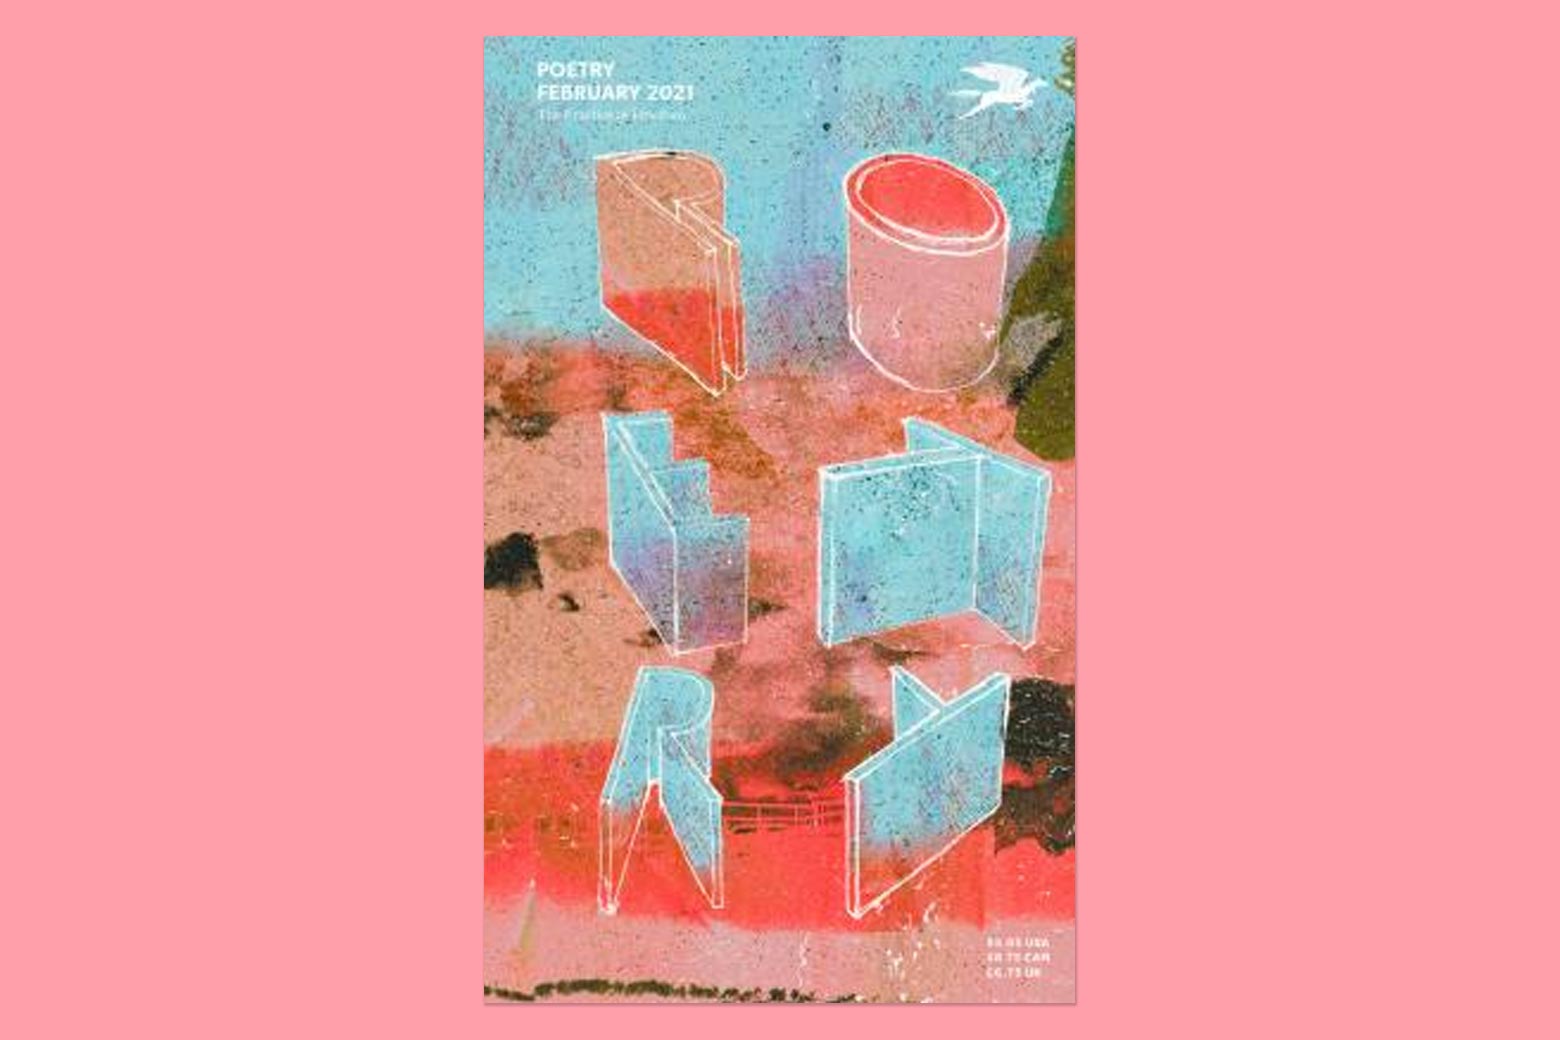 The cover of Poetry magazine’s February issue.